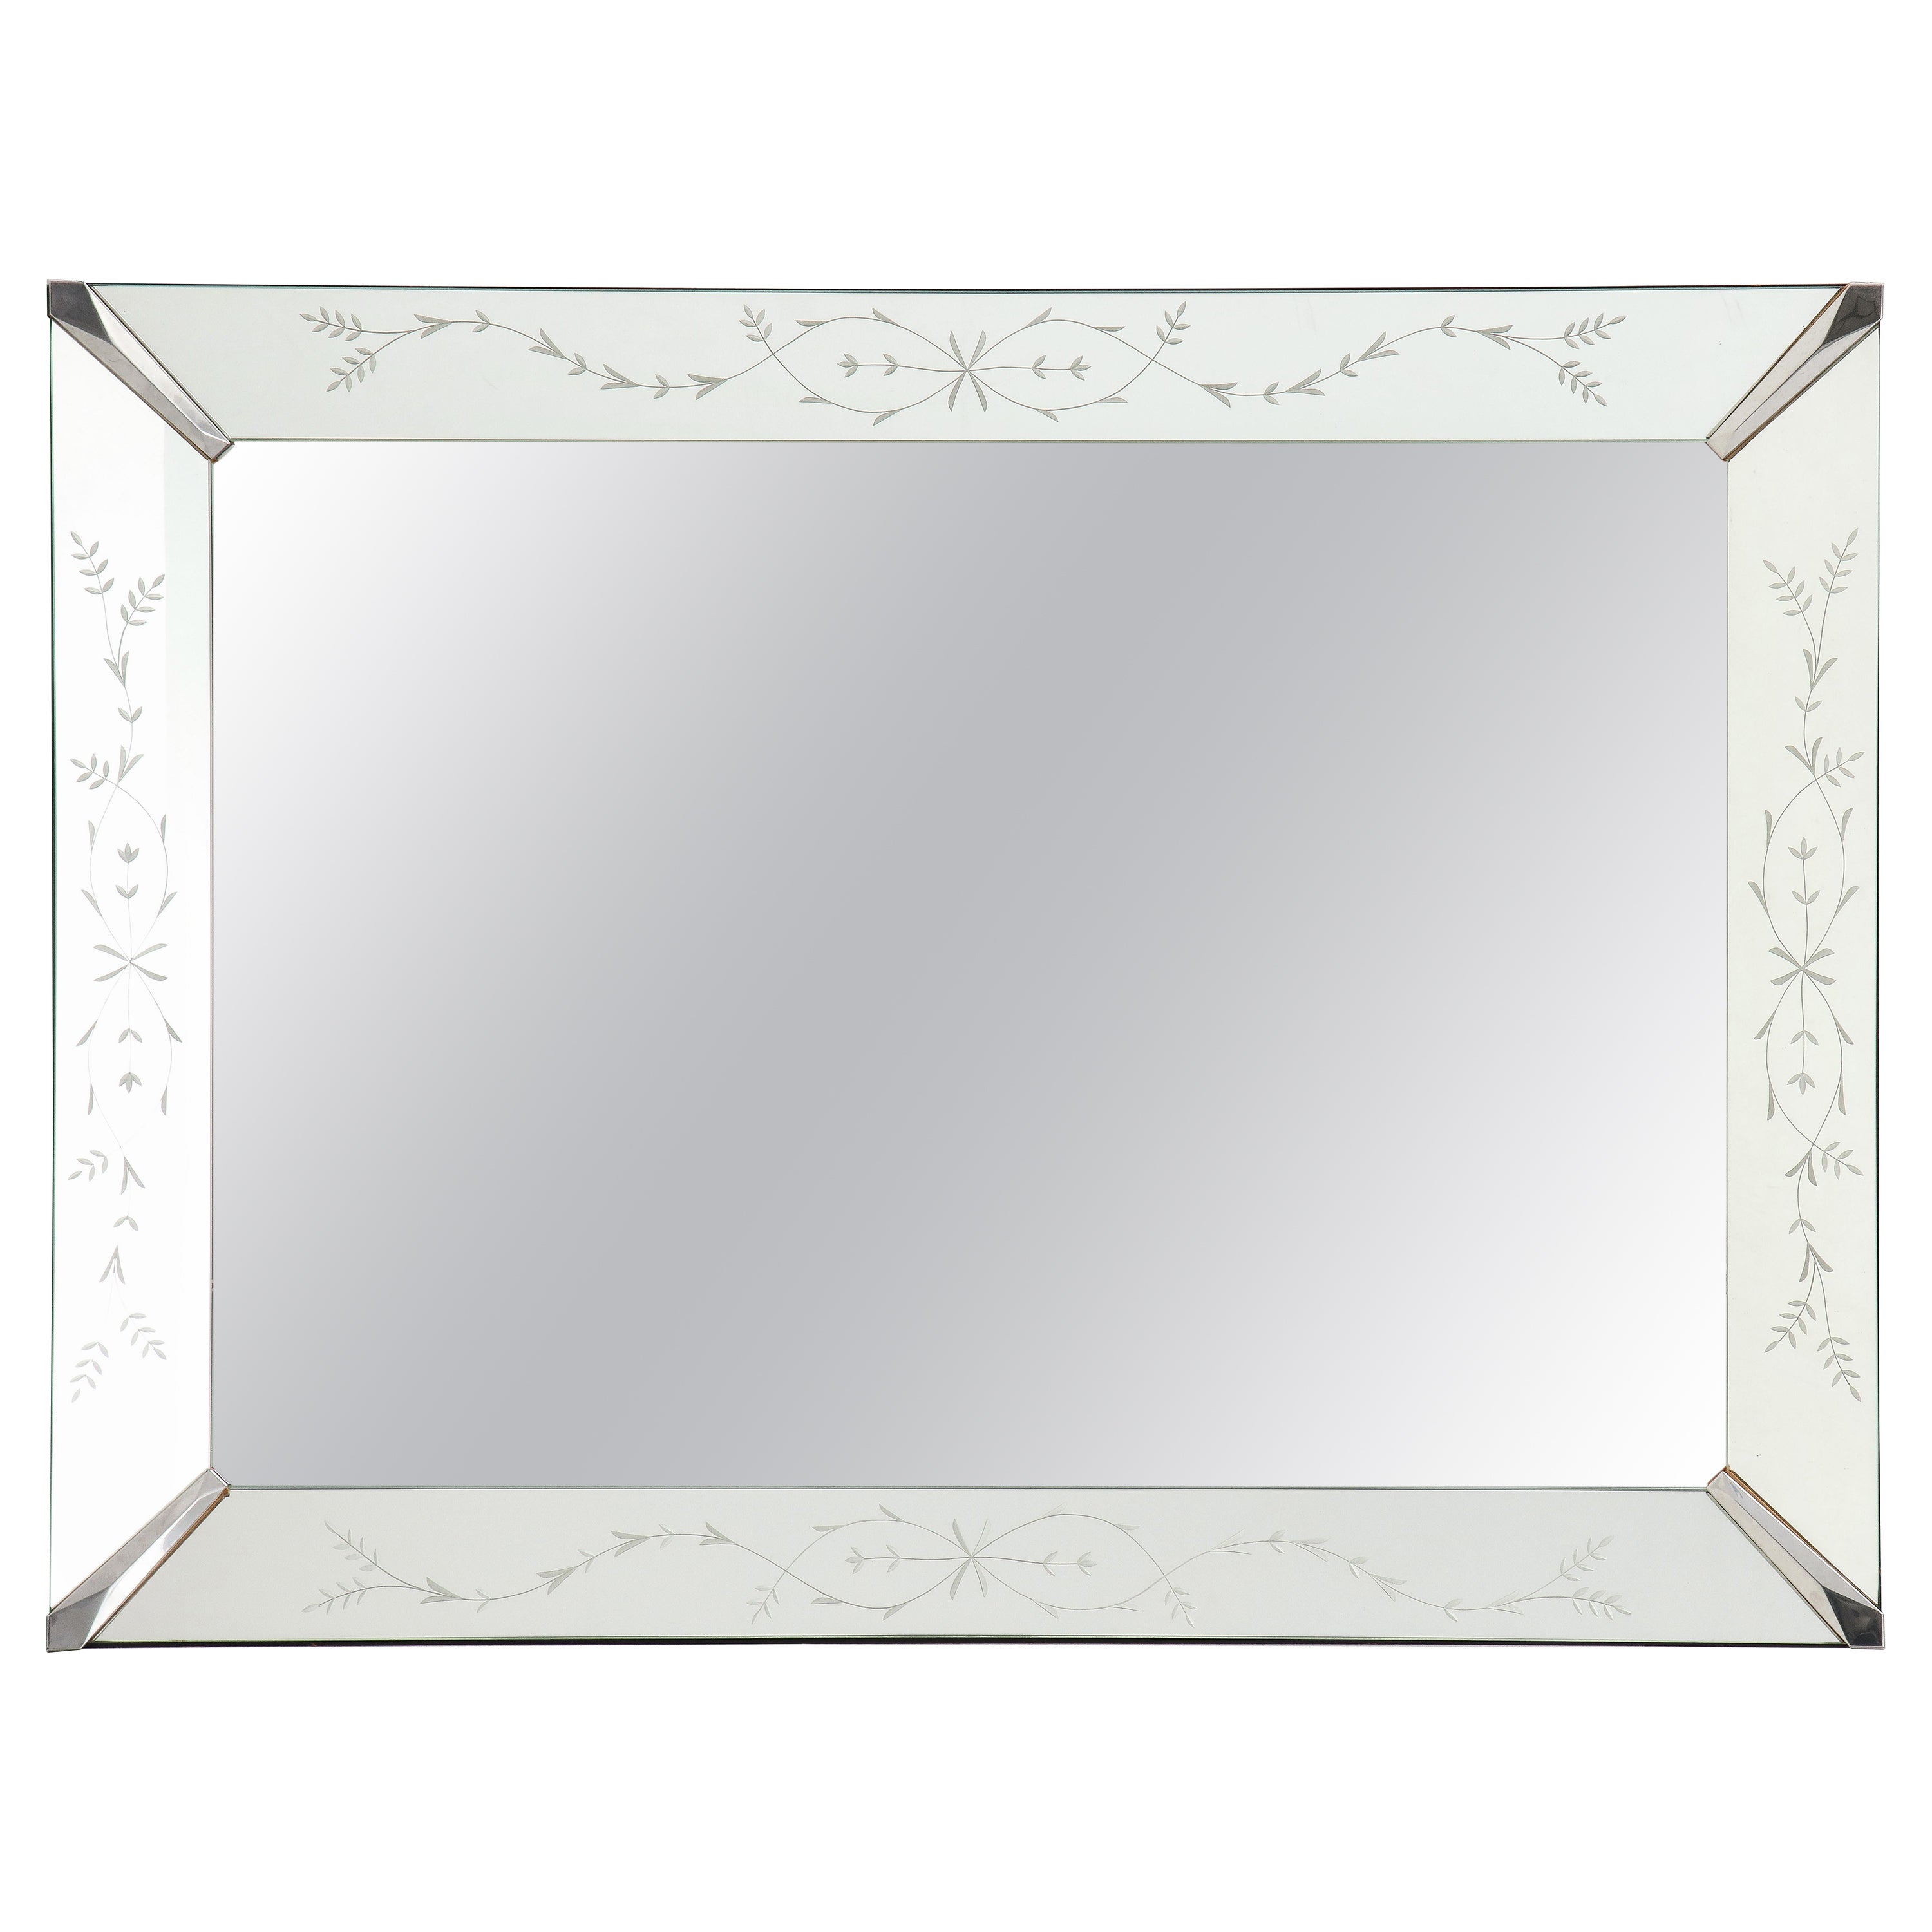 Etched Glass Mirror with Floral Motif